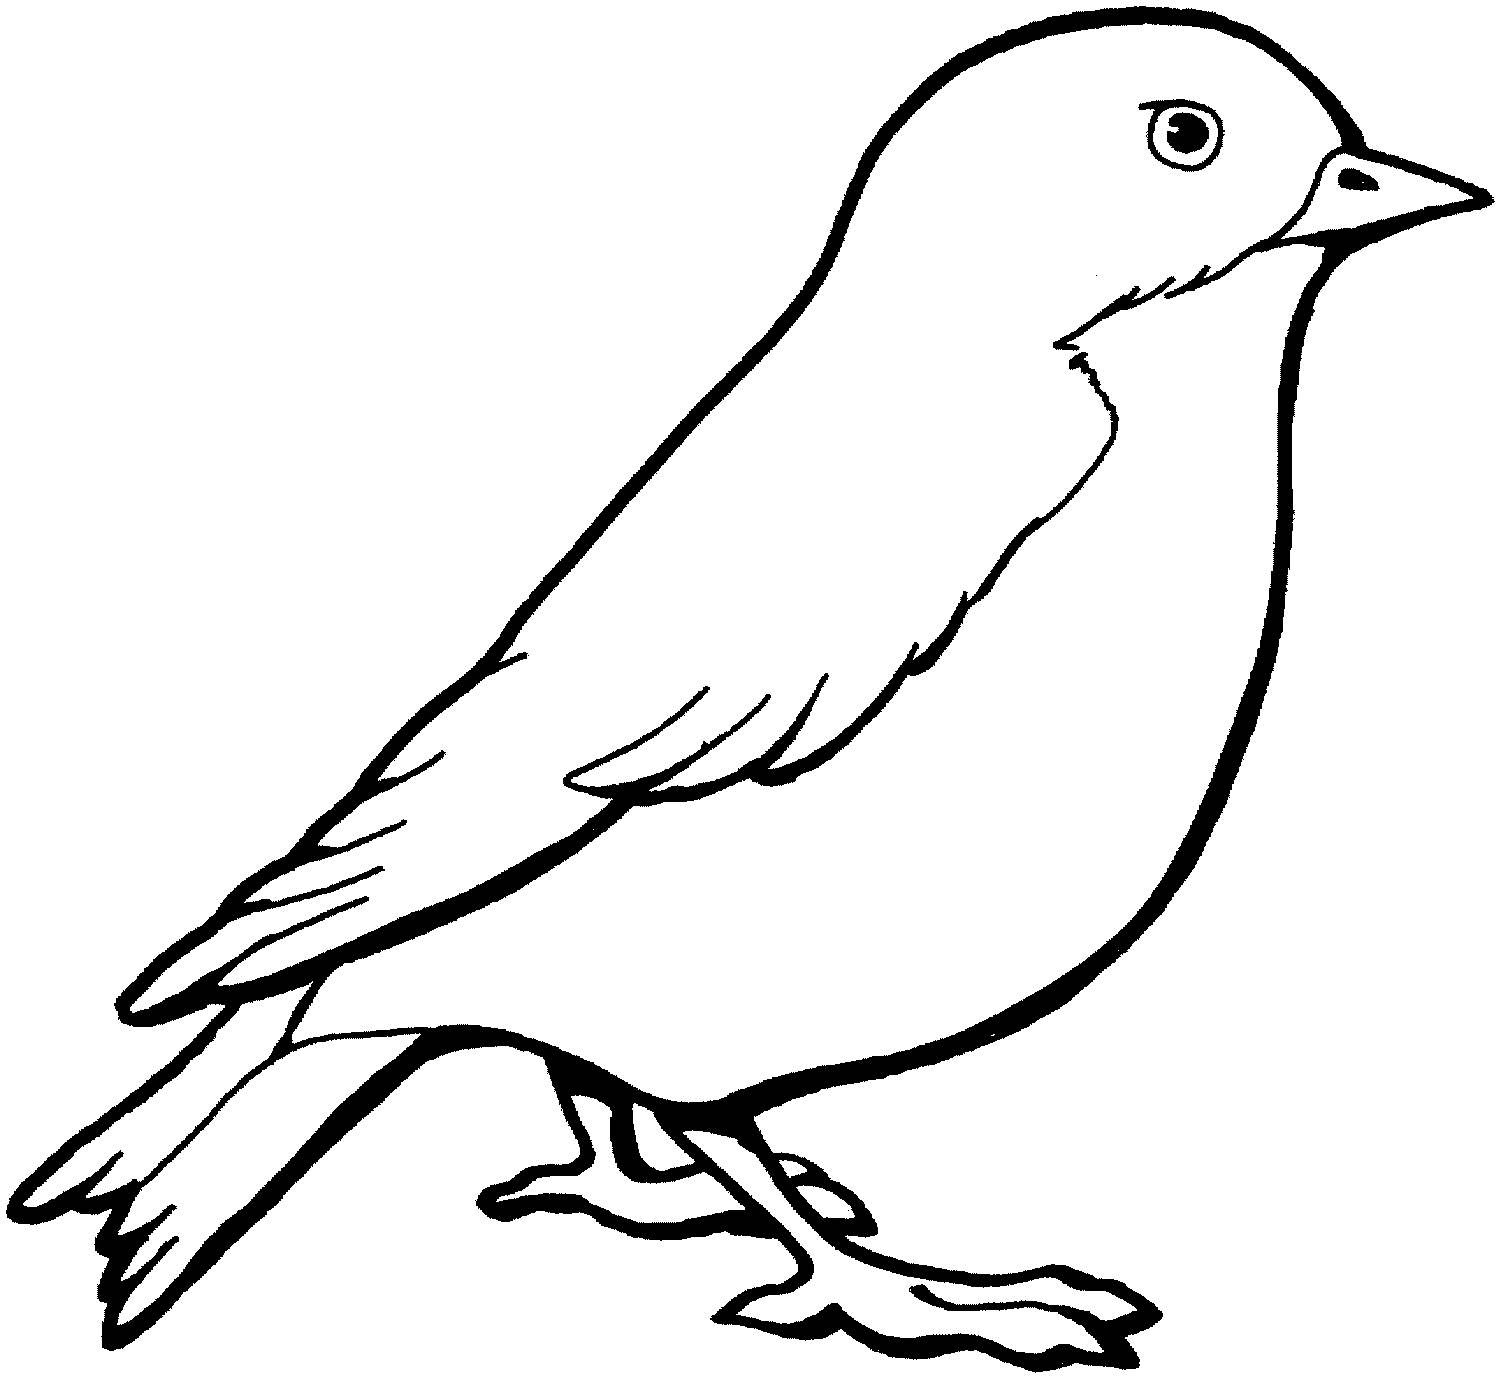 bird coloring pages free birds free to color for children birds kids coloring pages pages free coloring bird 